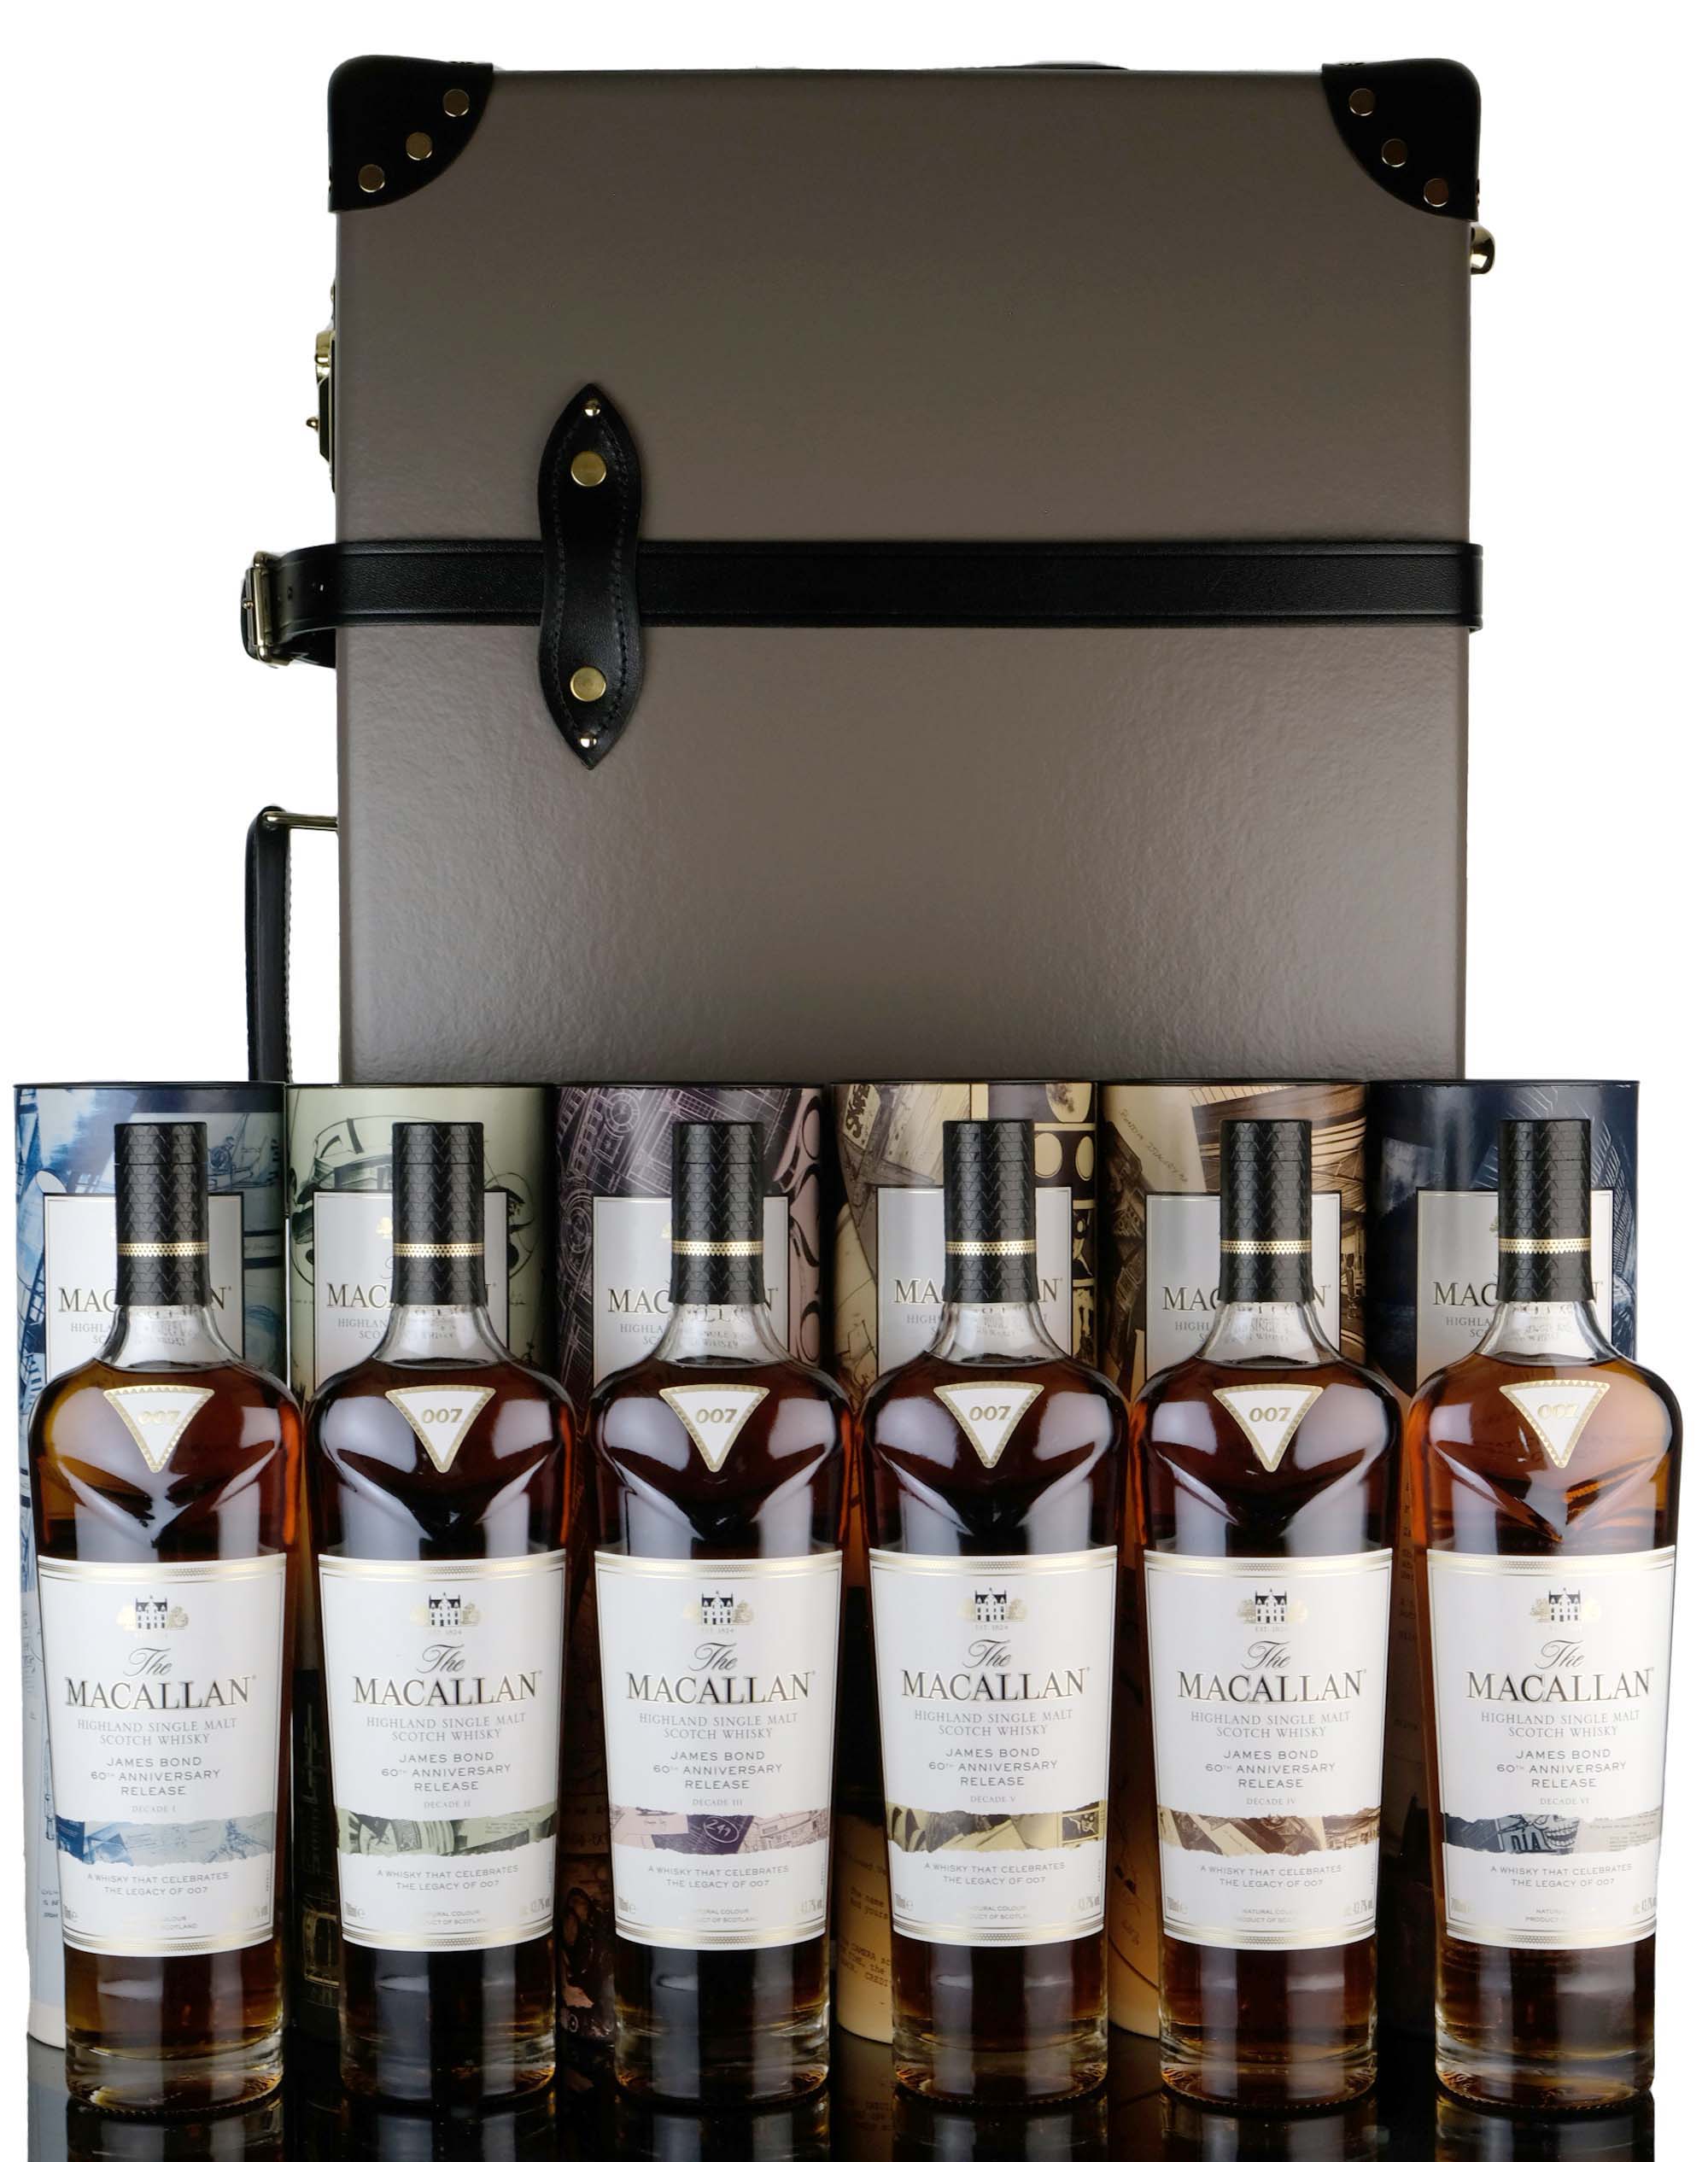 Macallan James Bond 007 60th Anniversary Release - Decade 1-6 - Globe Trotter Edition With